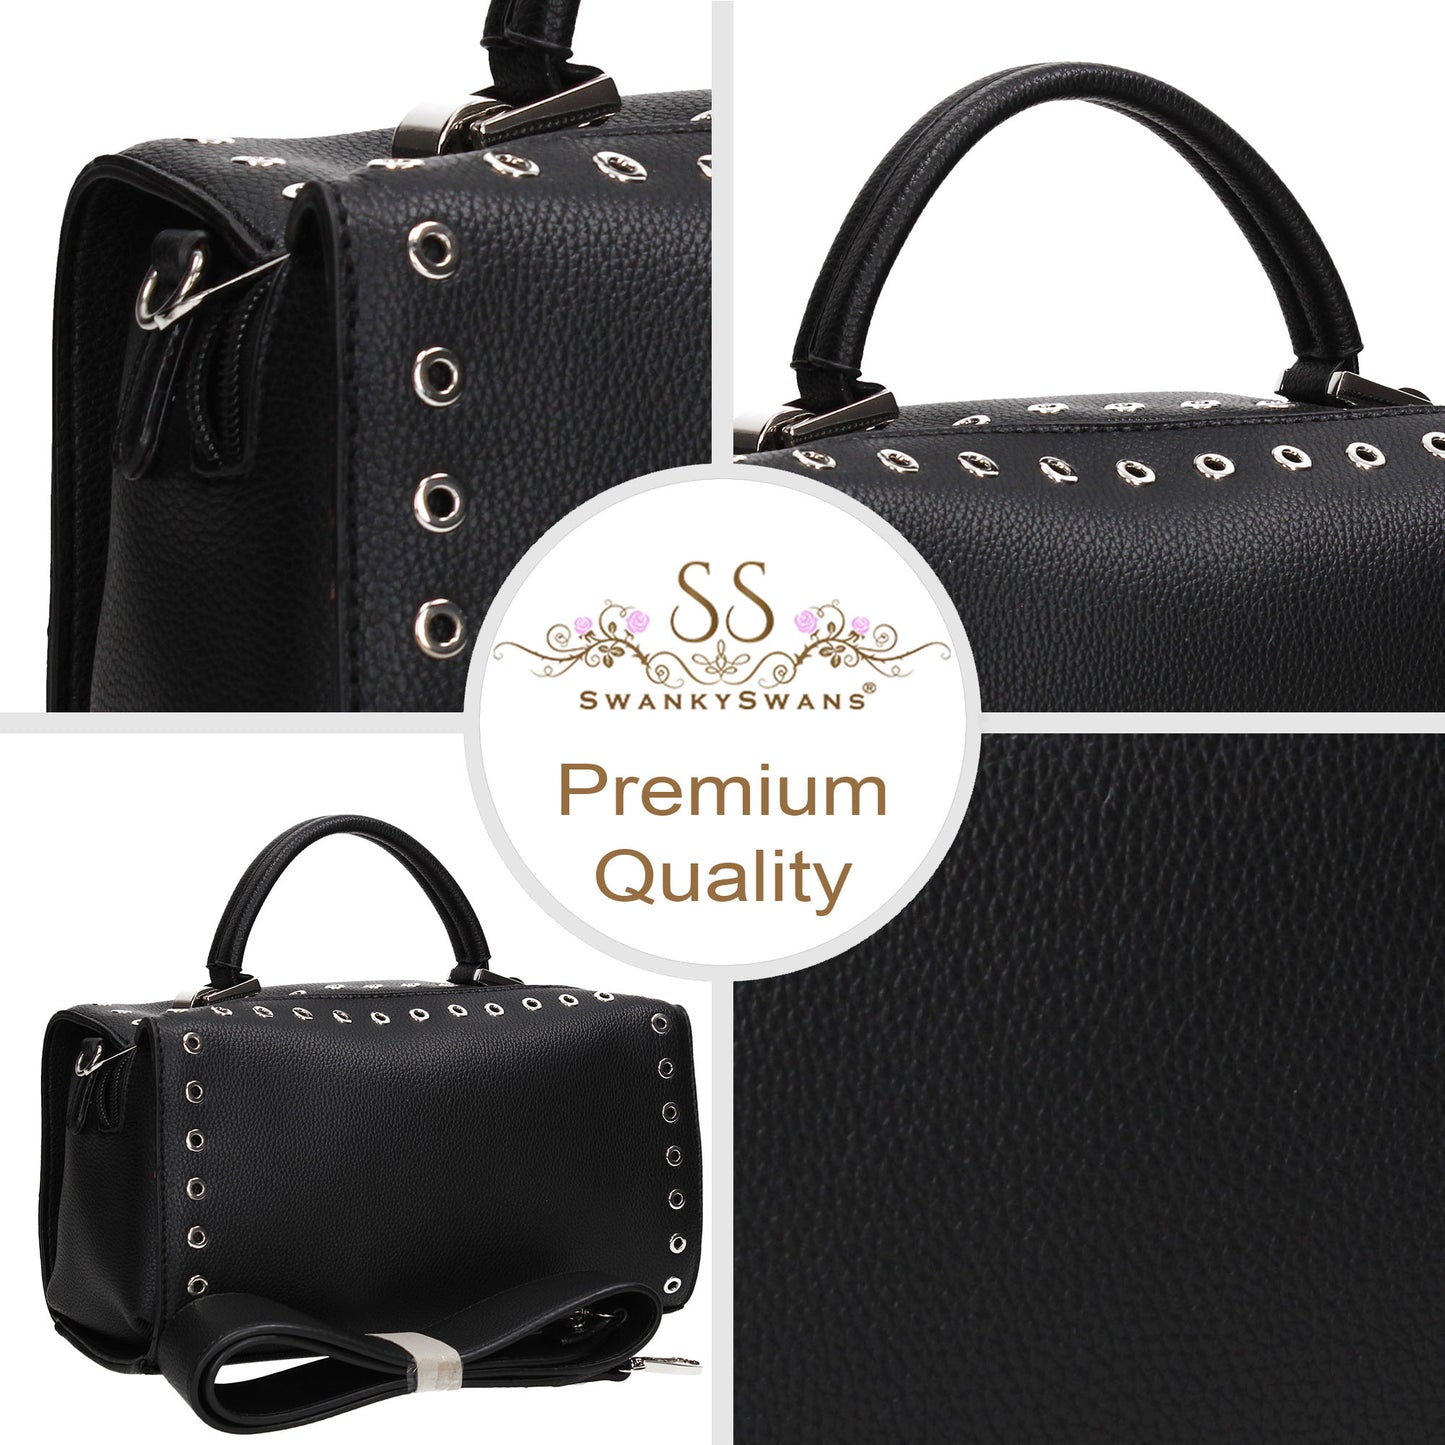 Buy your Anna Handbag Black Today! Buy with confidence from Swankyswans